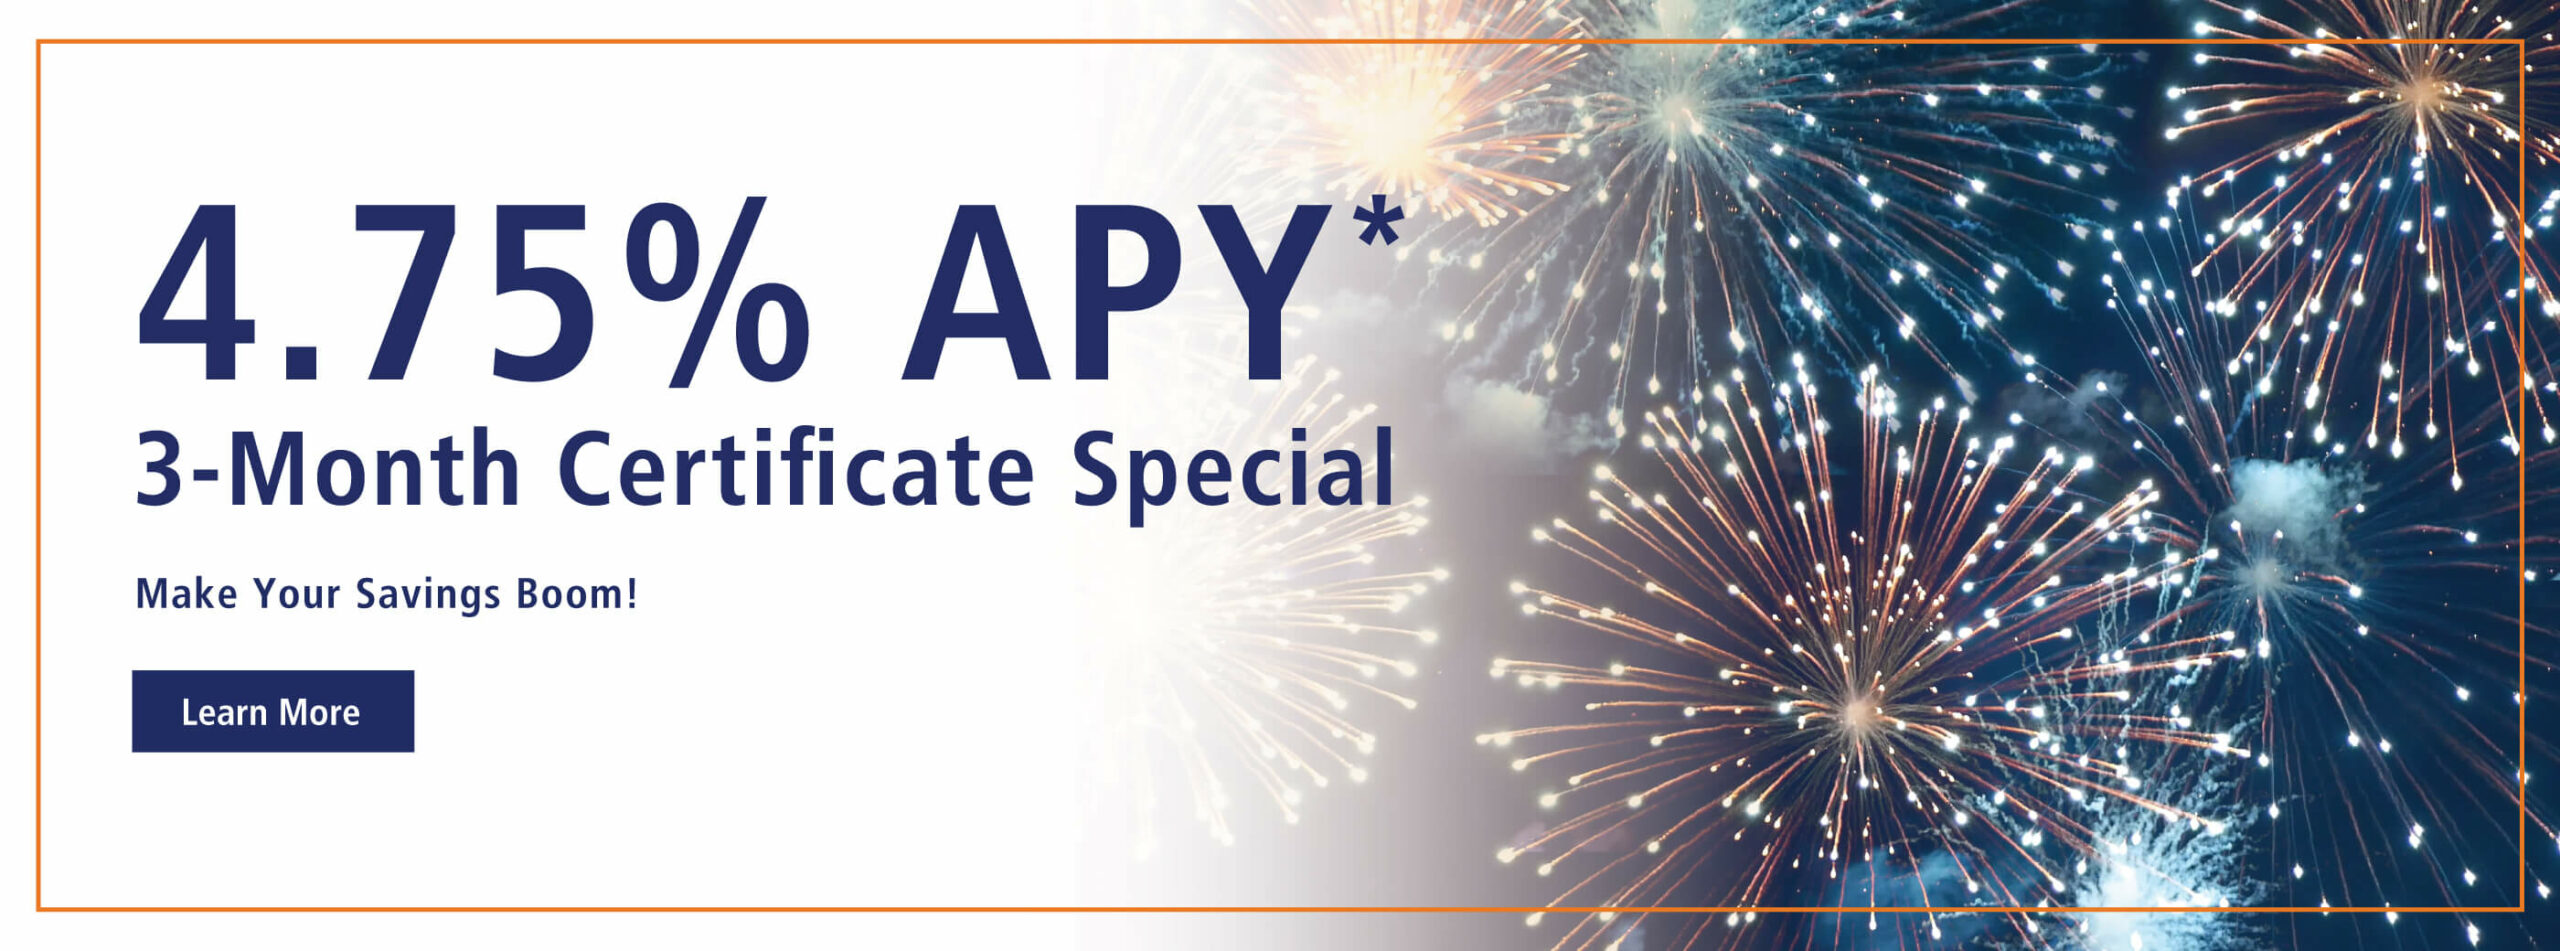 4.75% APY 3-Month Certificate Special